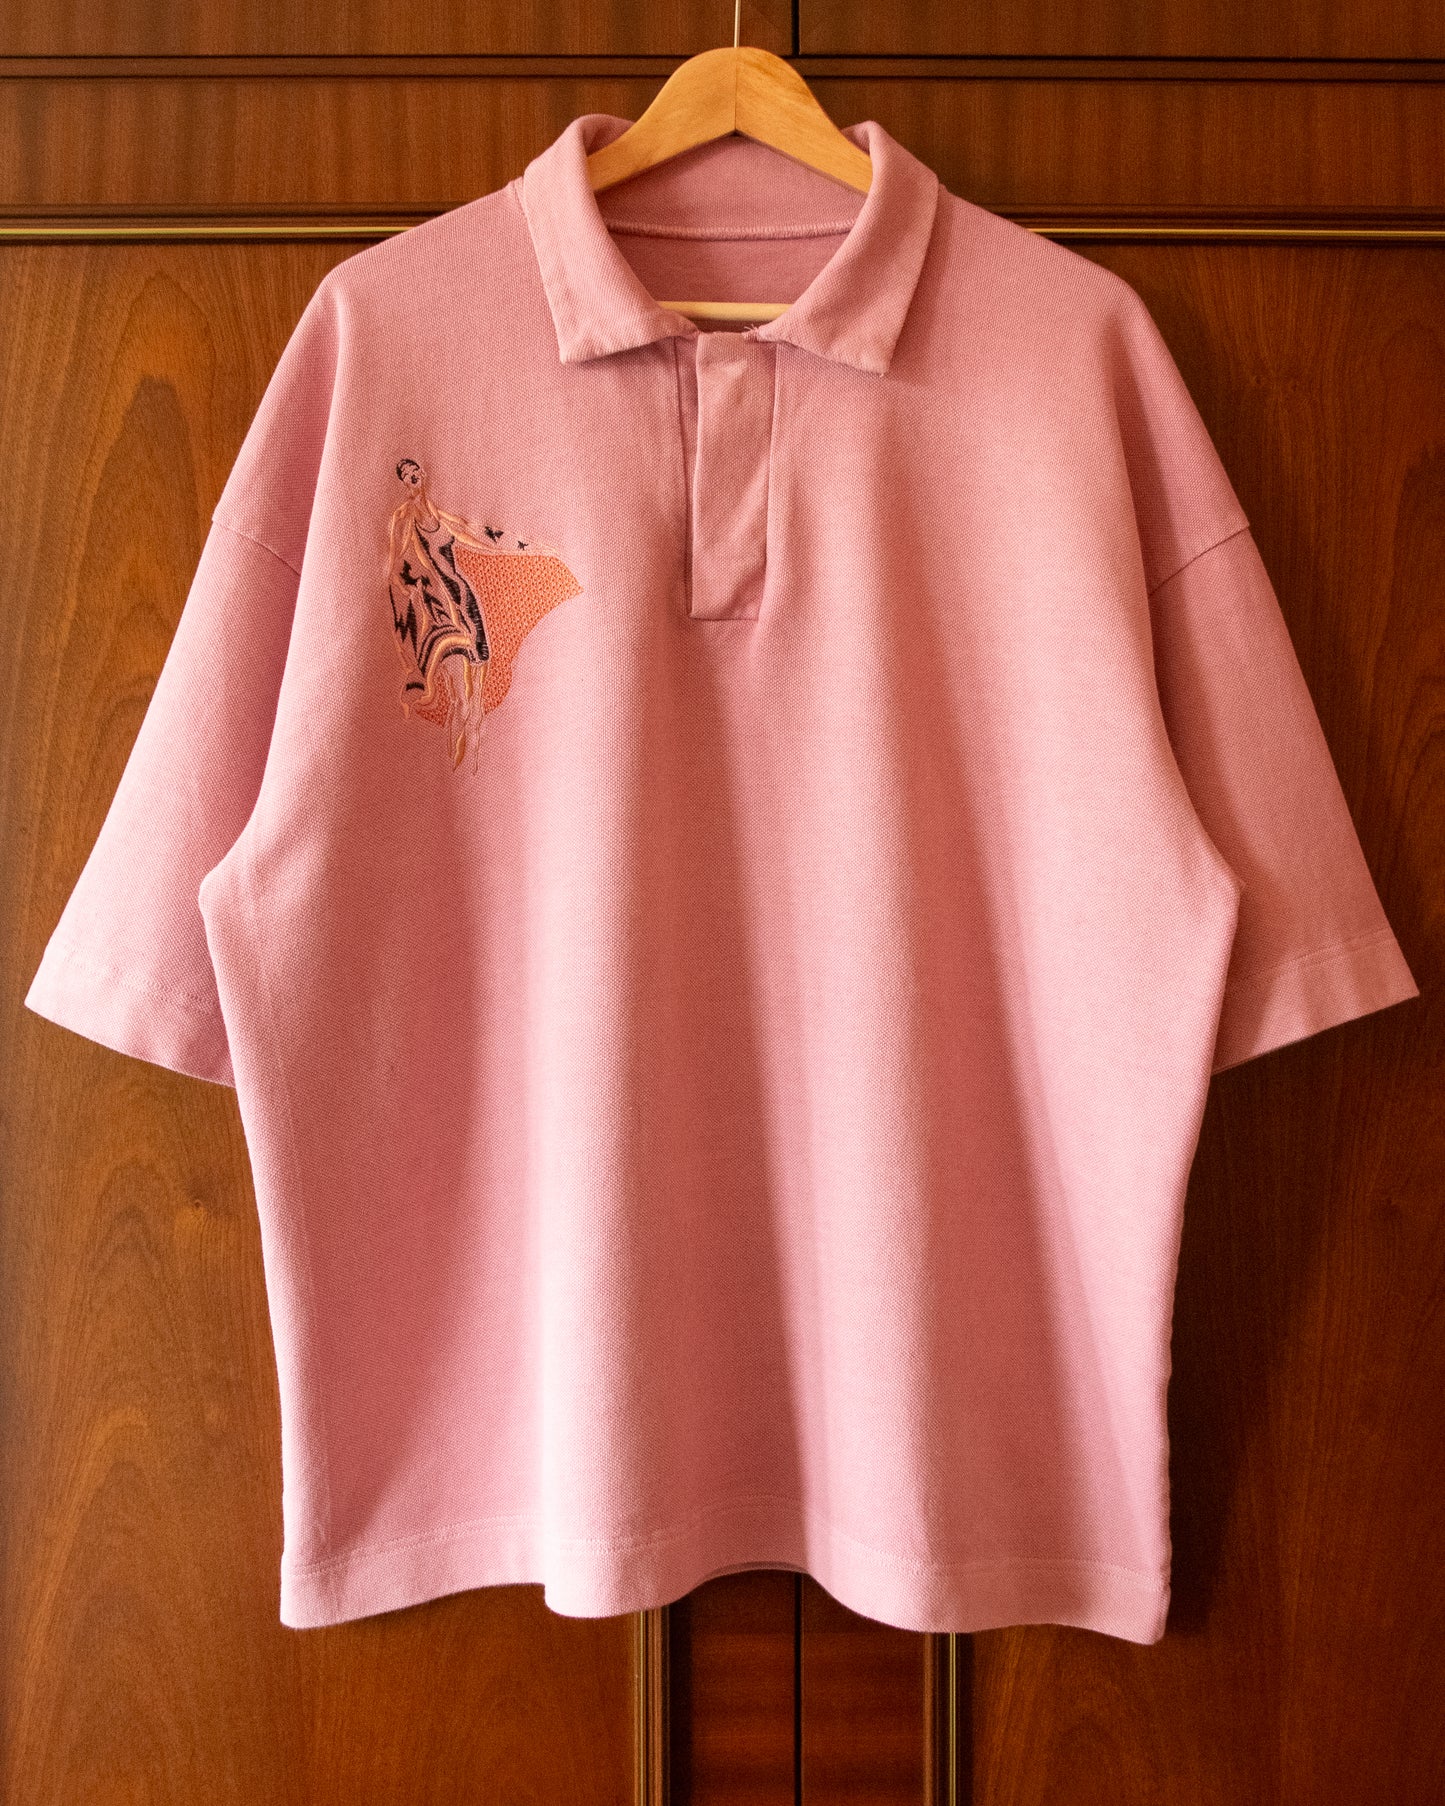 EMBROIDERED TENNIS SHIRT IN BLOSSOM